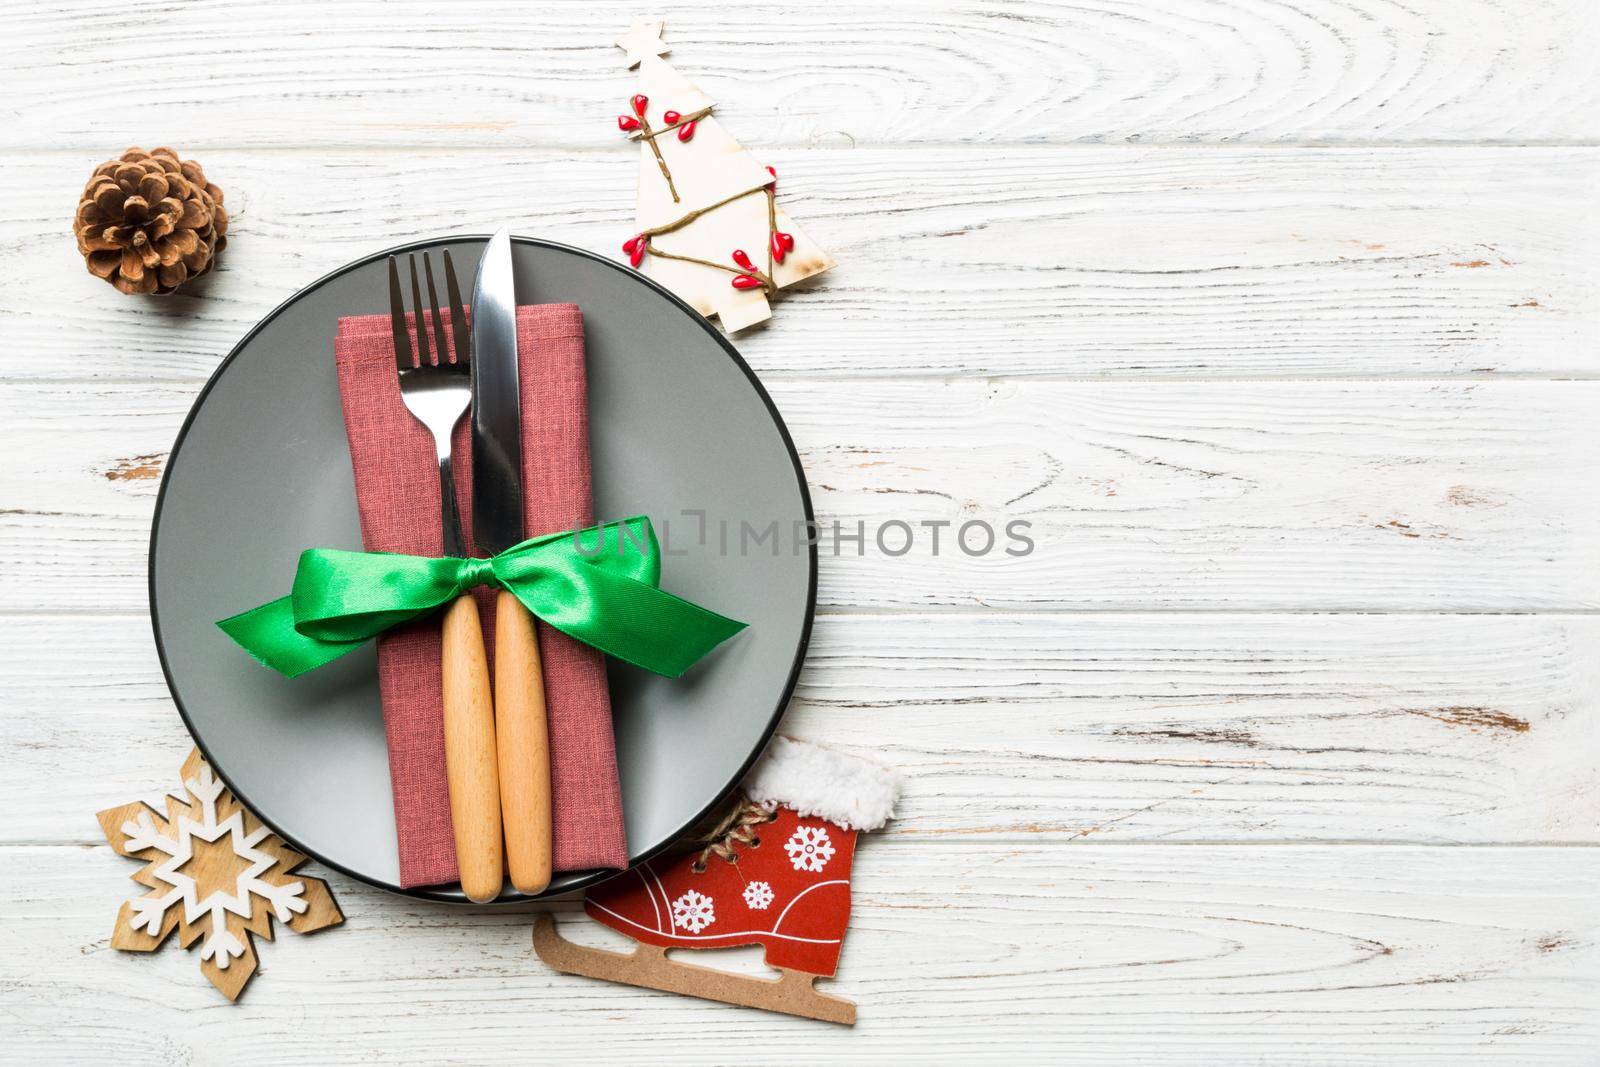 Holiday composition of Christmas dinner on wooden background. Top view of plate, utensil and festive decorations. New Year Advent concept with copy space.